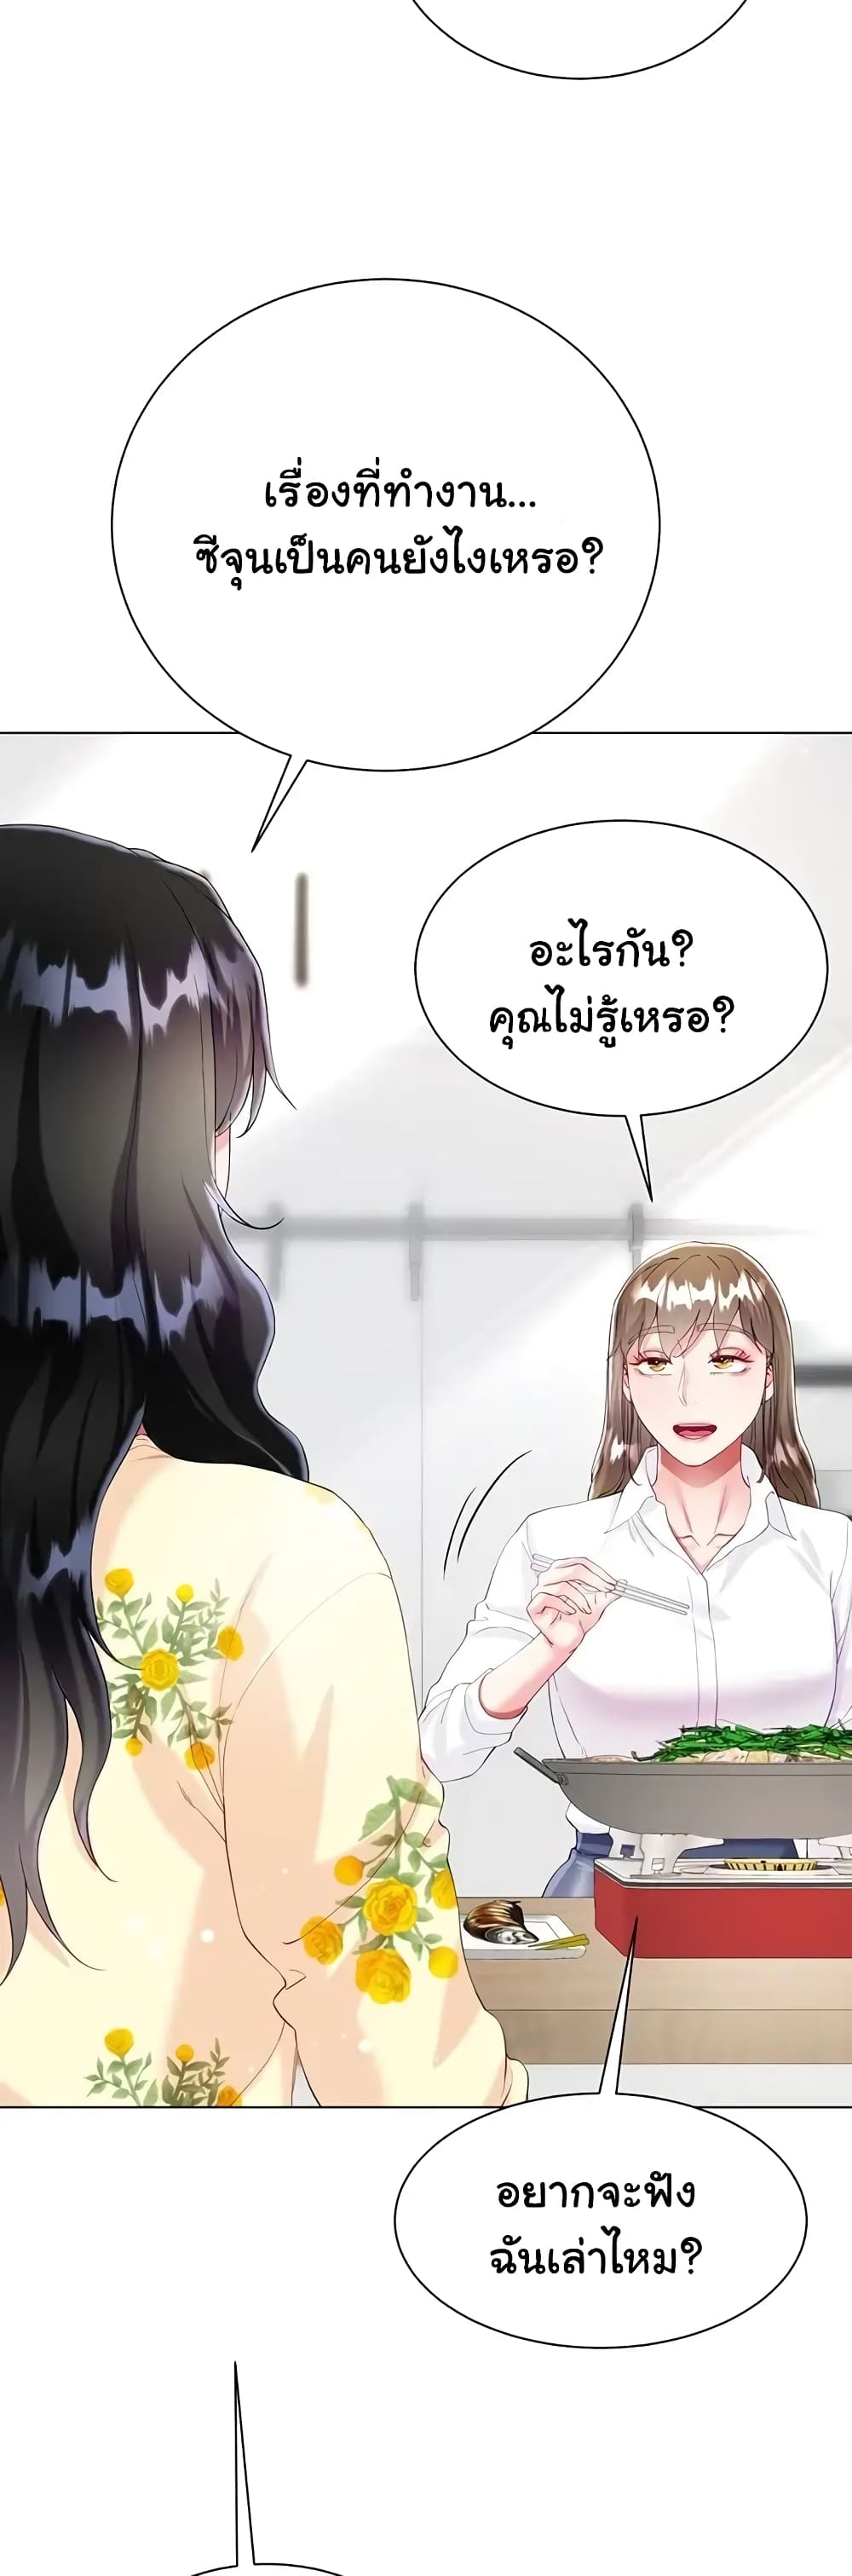 My Sister-in-law’s Skirt 29 ภาพที่ 17